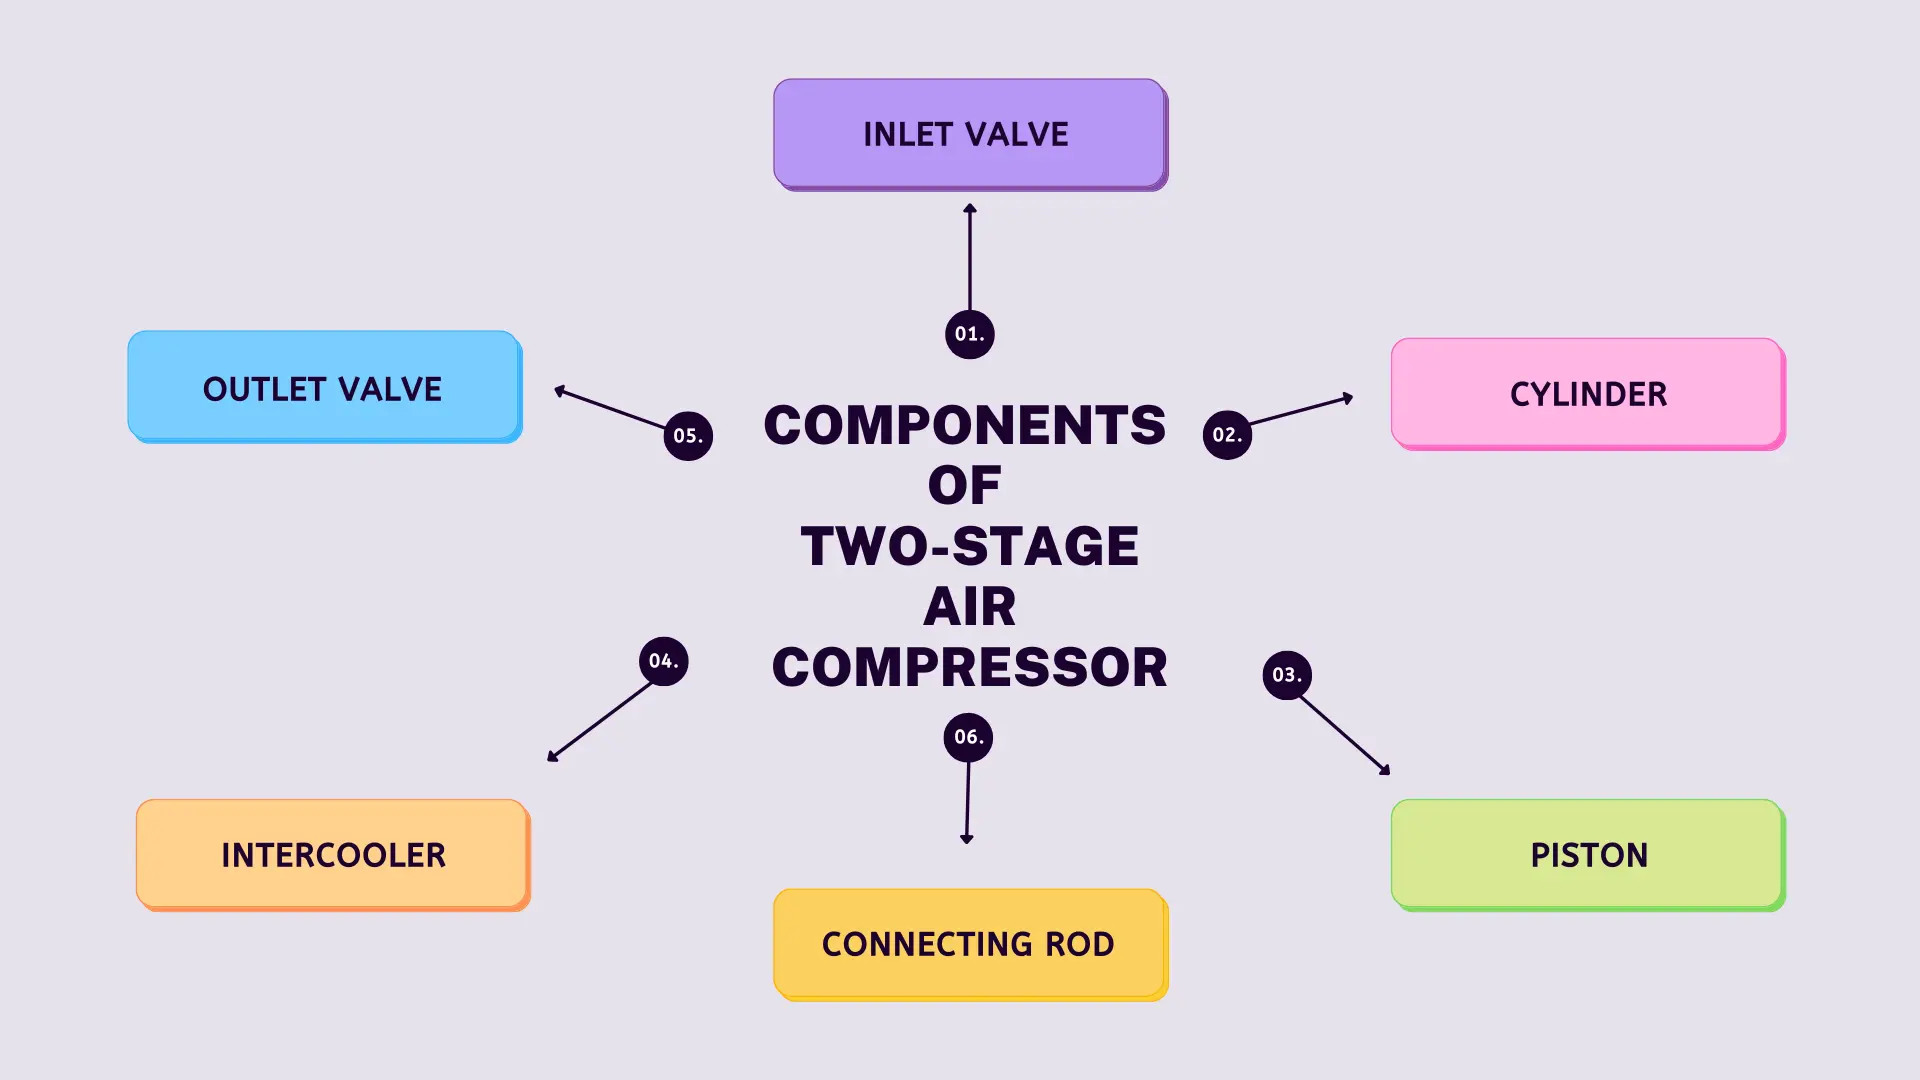 Components of Two-stage Air Compressor